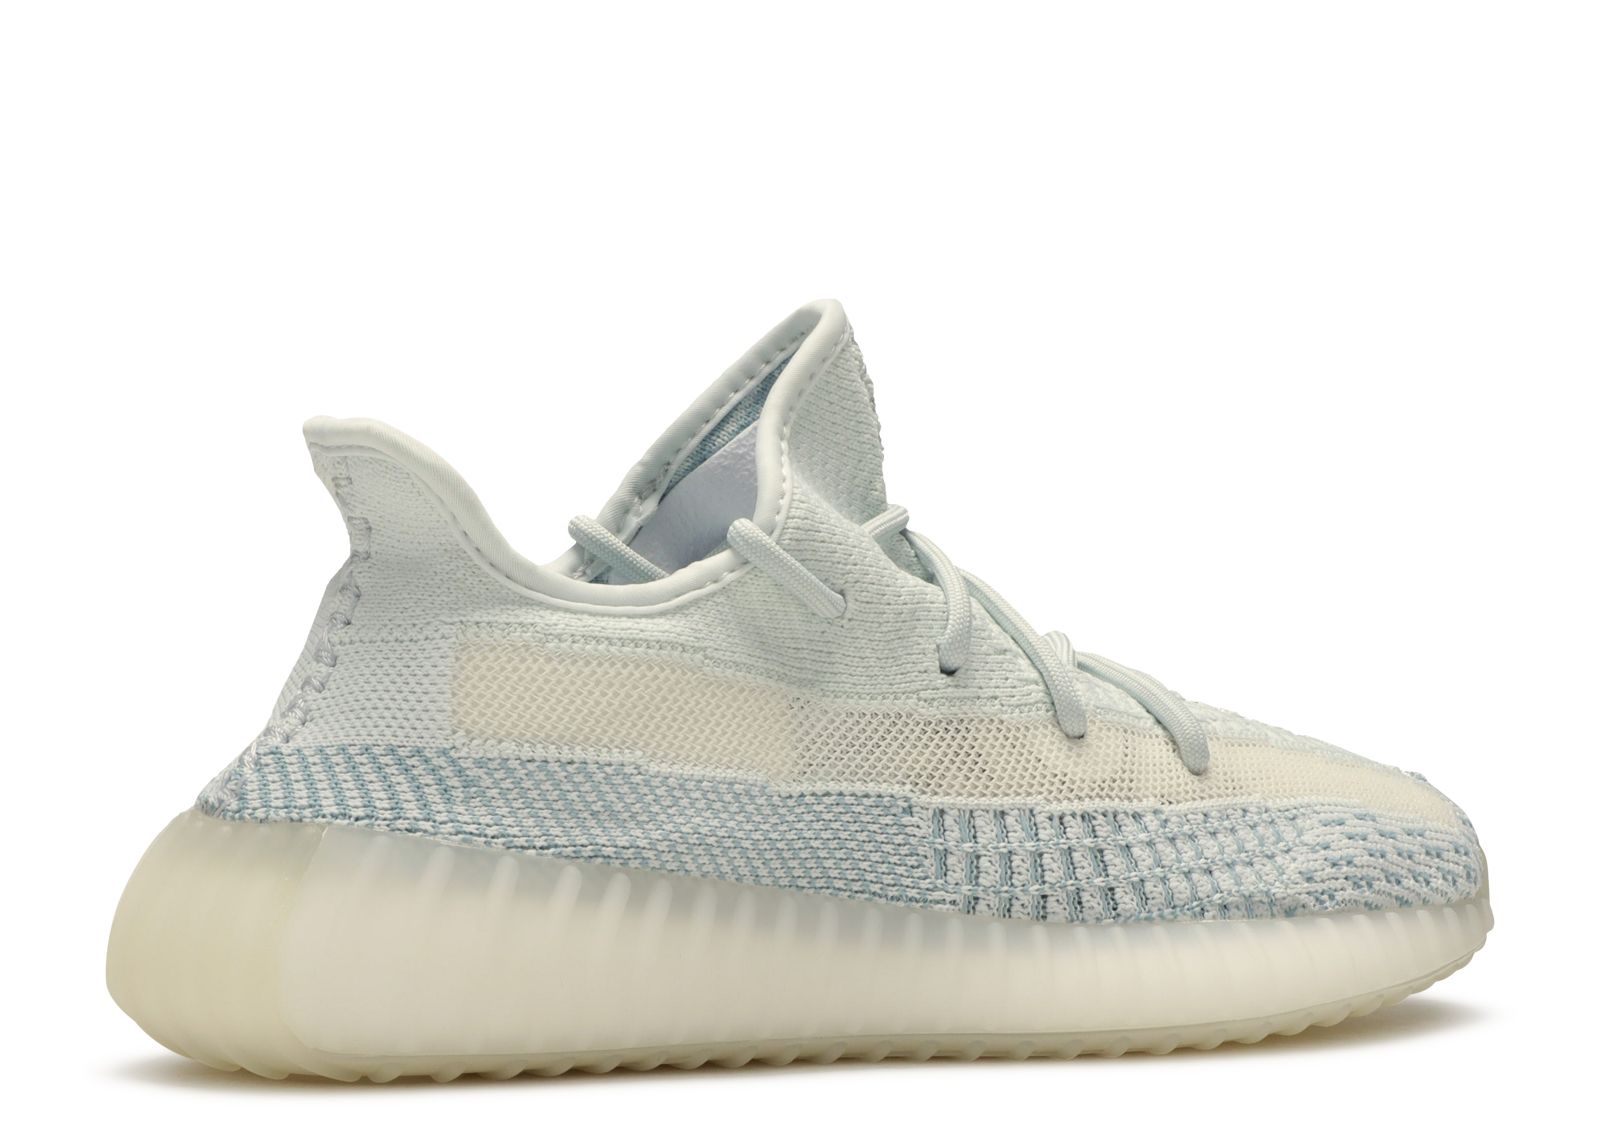 Yeezy Boost 350 V2 'Cloud White Non 